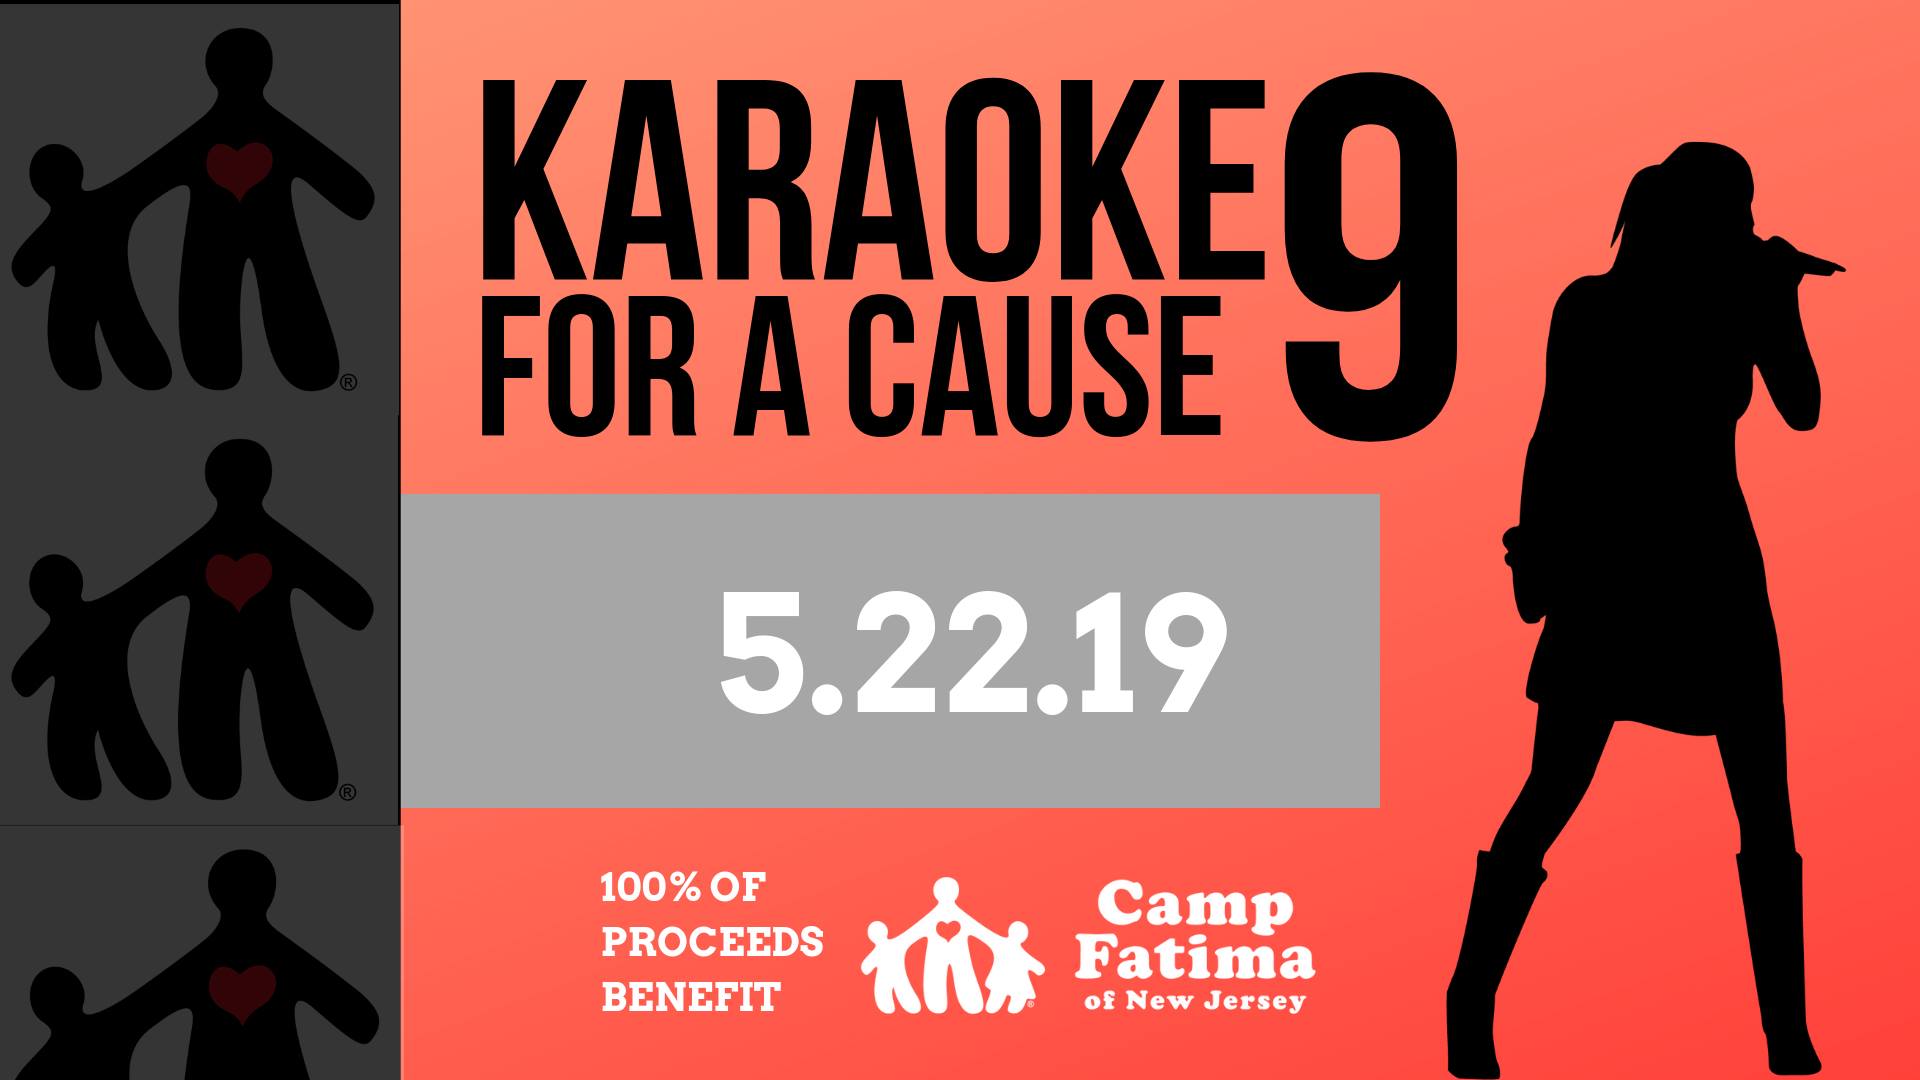 event listing for karaoke for a cause 9 benefiting camp fatima of new jersey